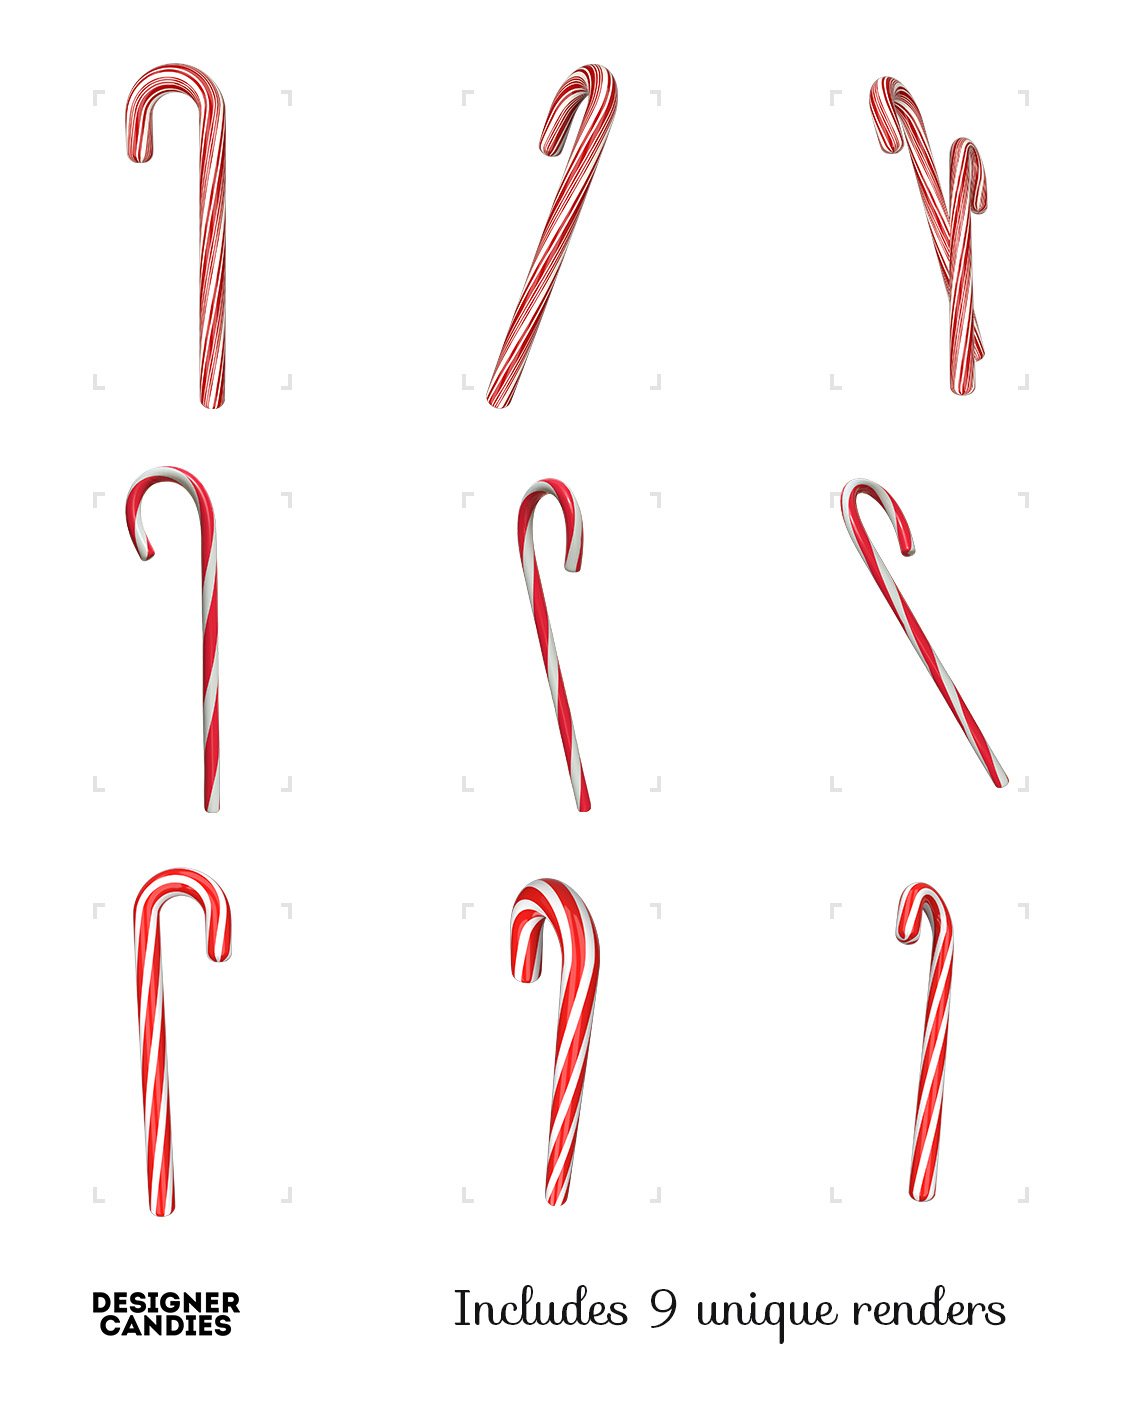 Free Candy Cane Renders in .PNG